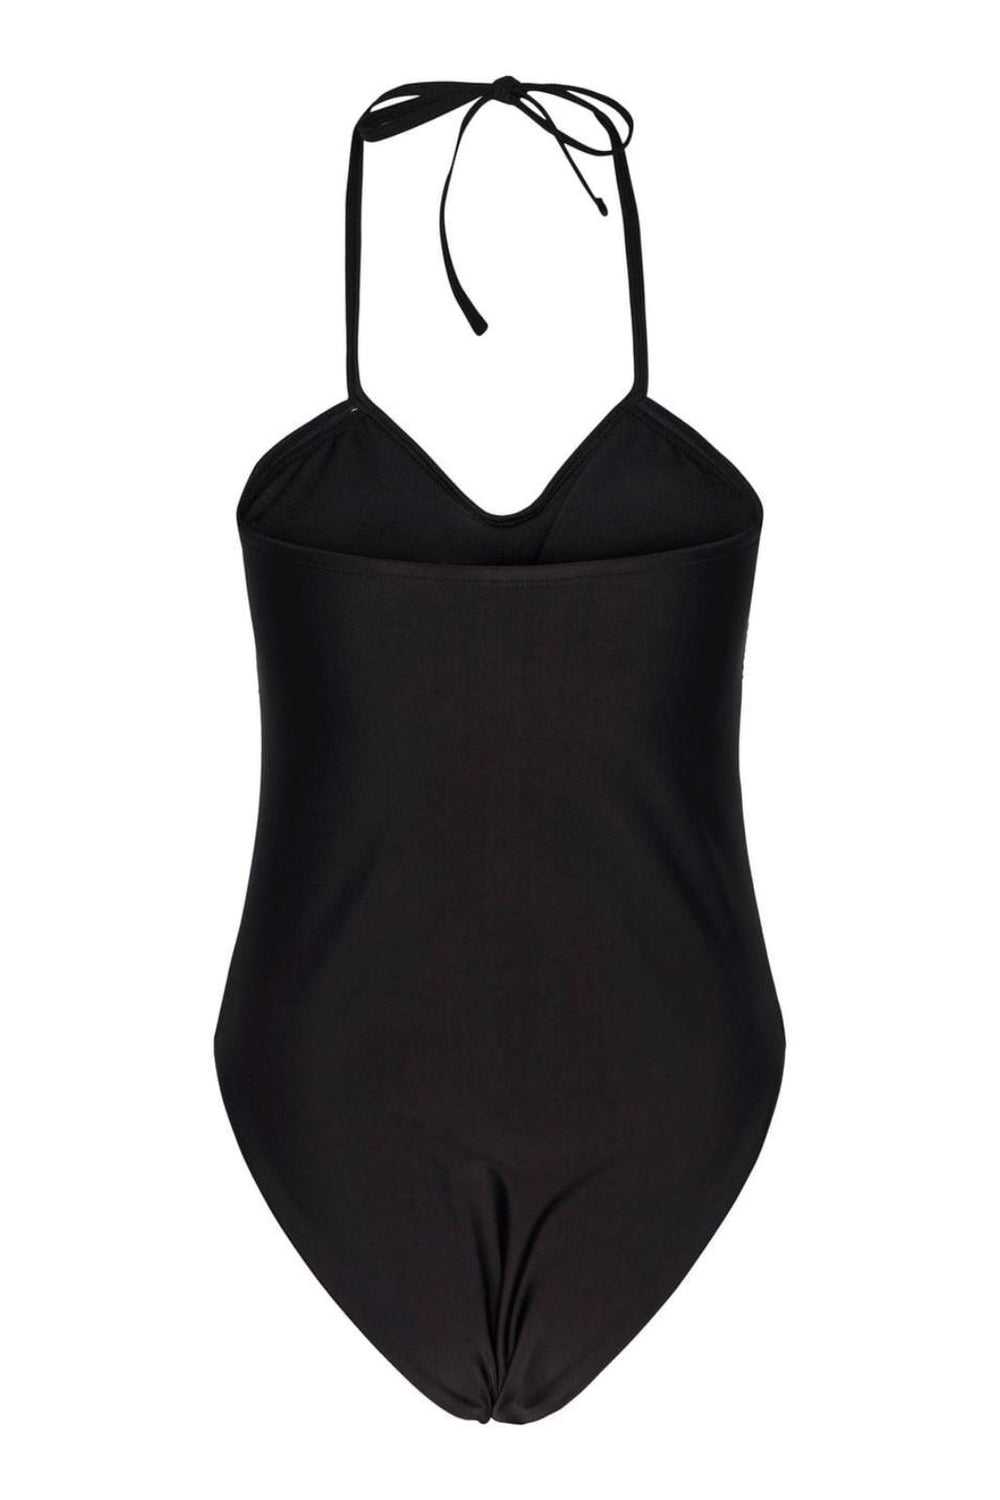 Pieces - Pcayda Swimsuit Sww - 4429502 Black Onyx Badedragter 